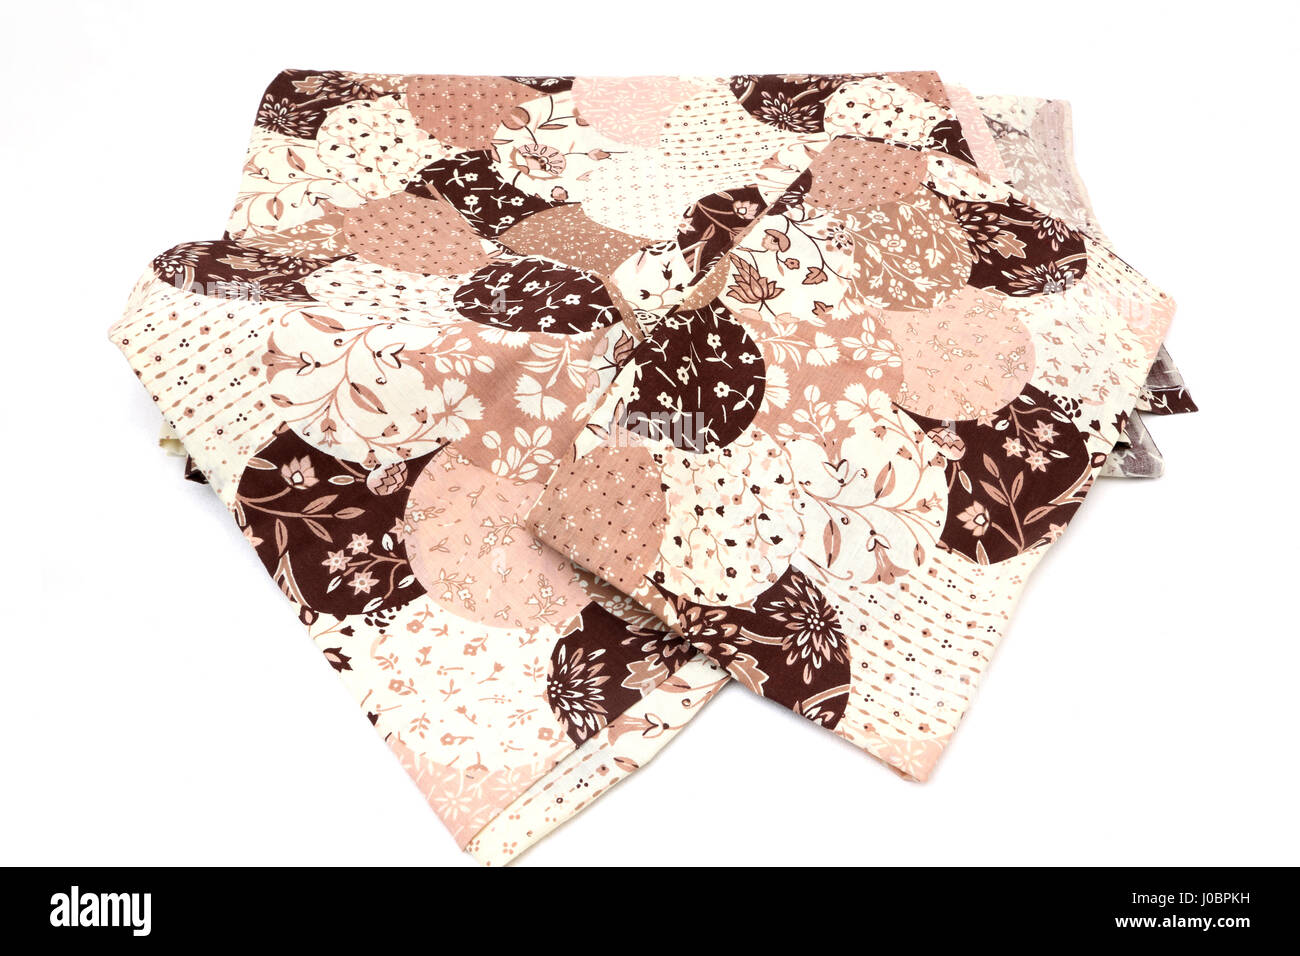 Vintage 1960's Floral Print Bed Sheets Pink, Cream And Brown Stock Photo